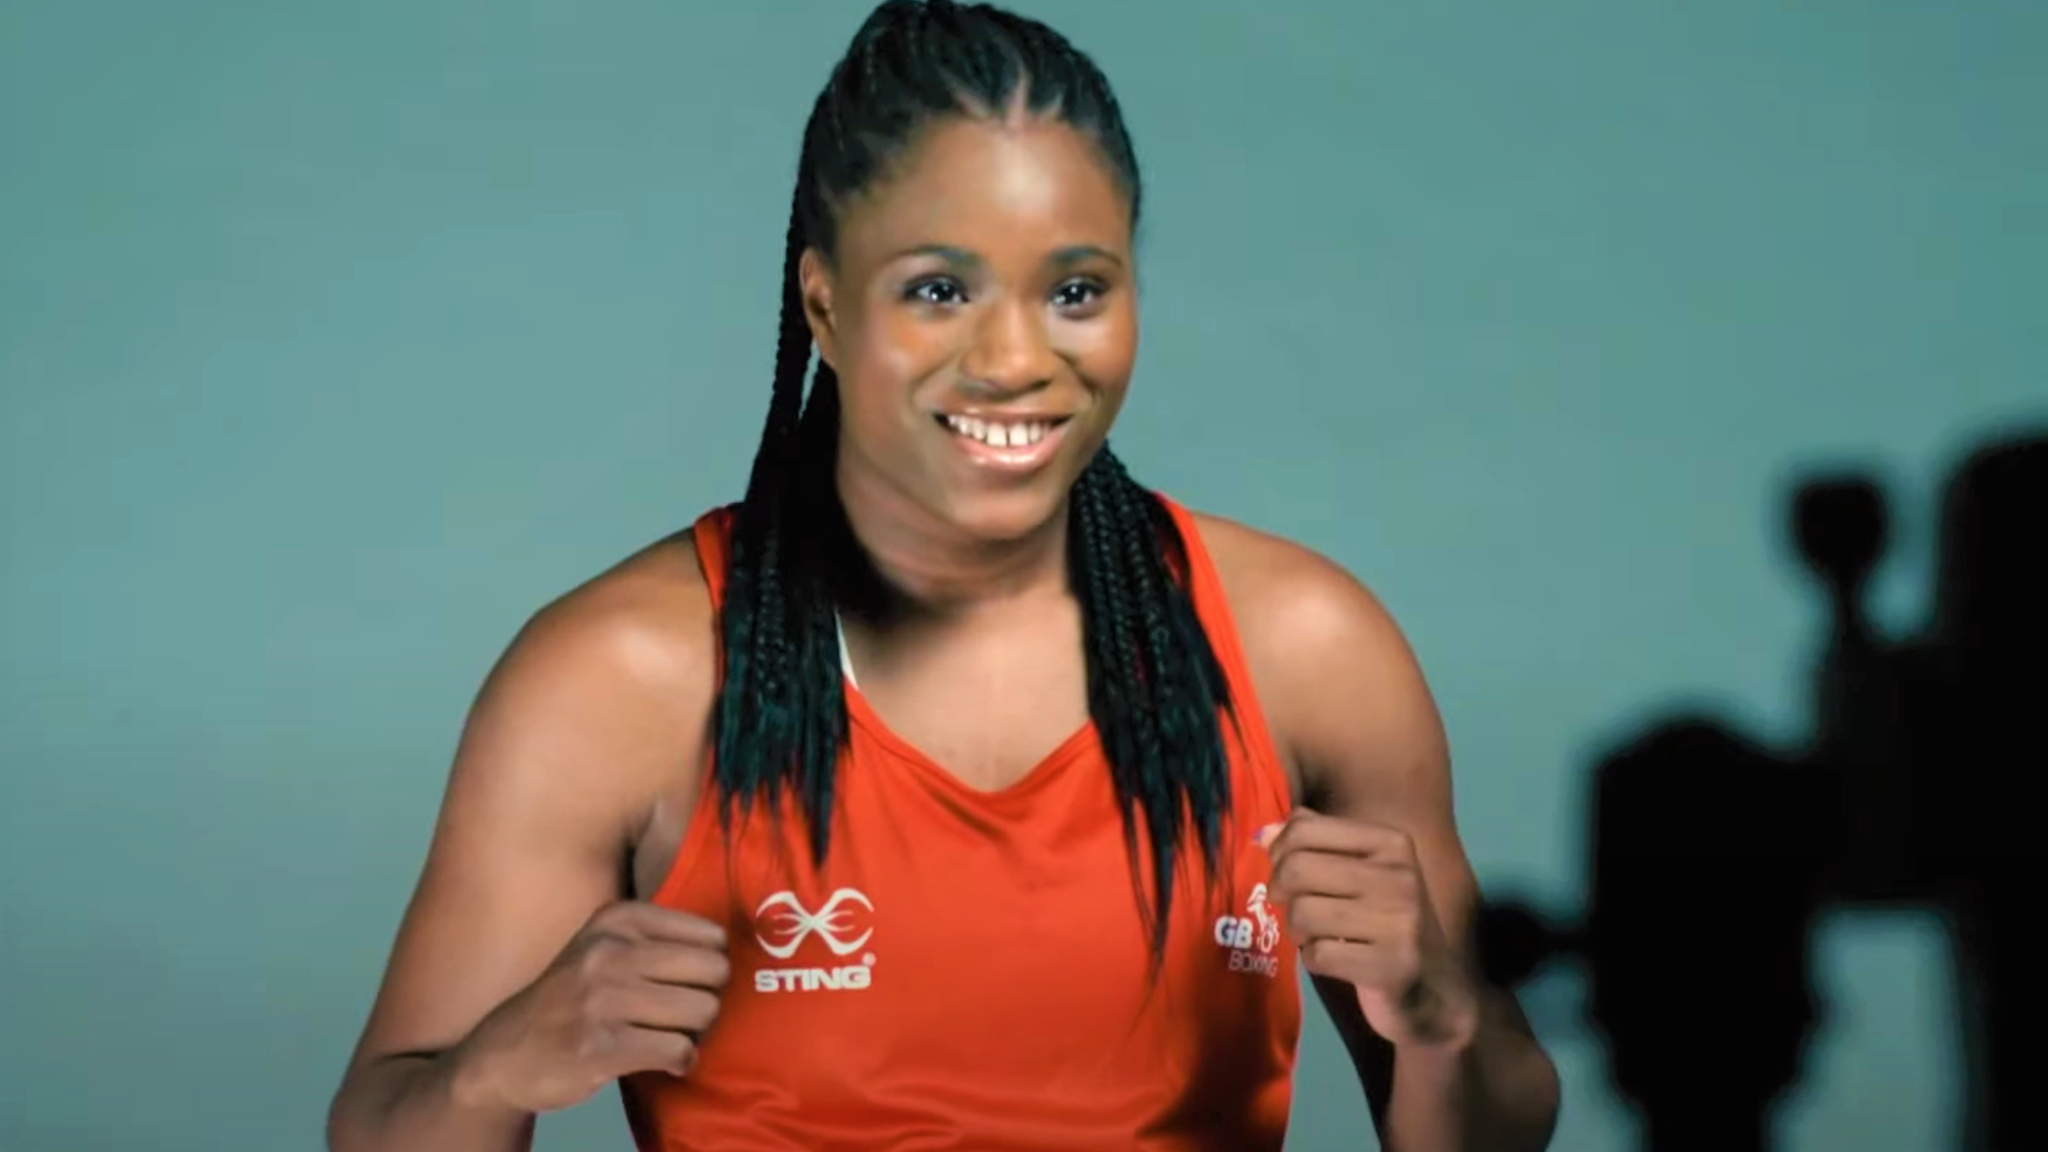 Caroline Dubois brings KOs to women's boxing and only spars men